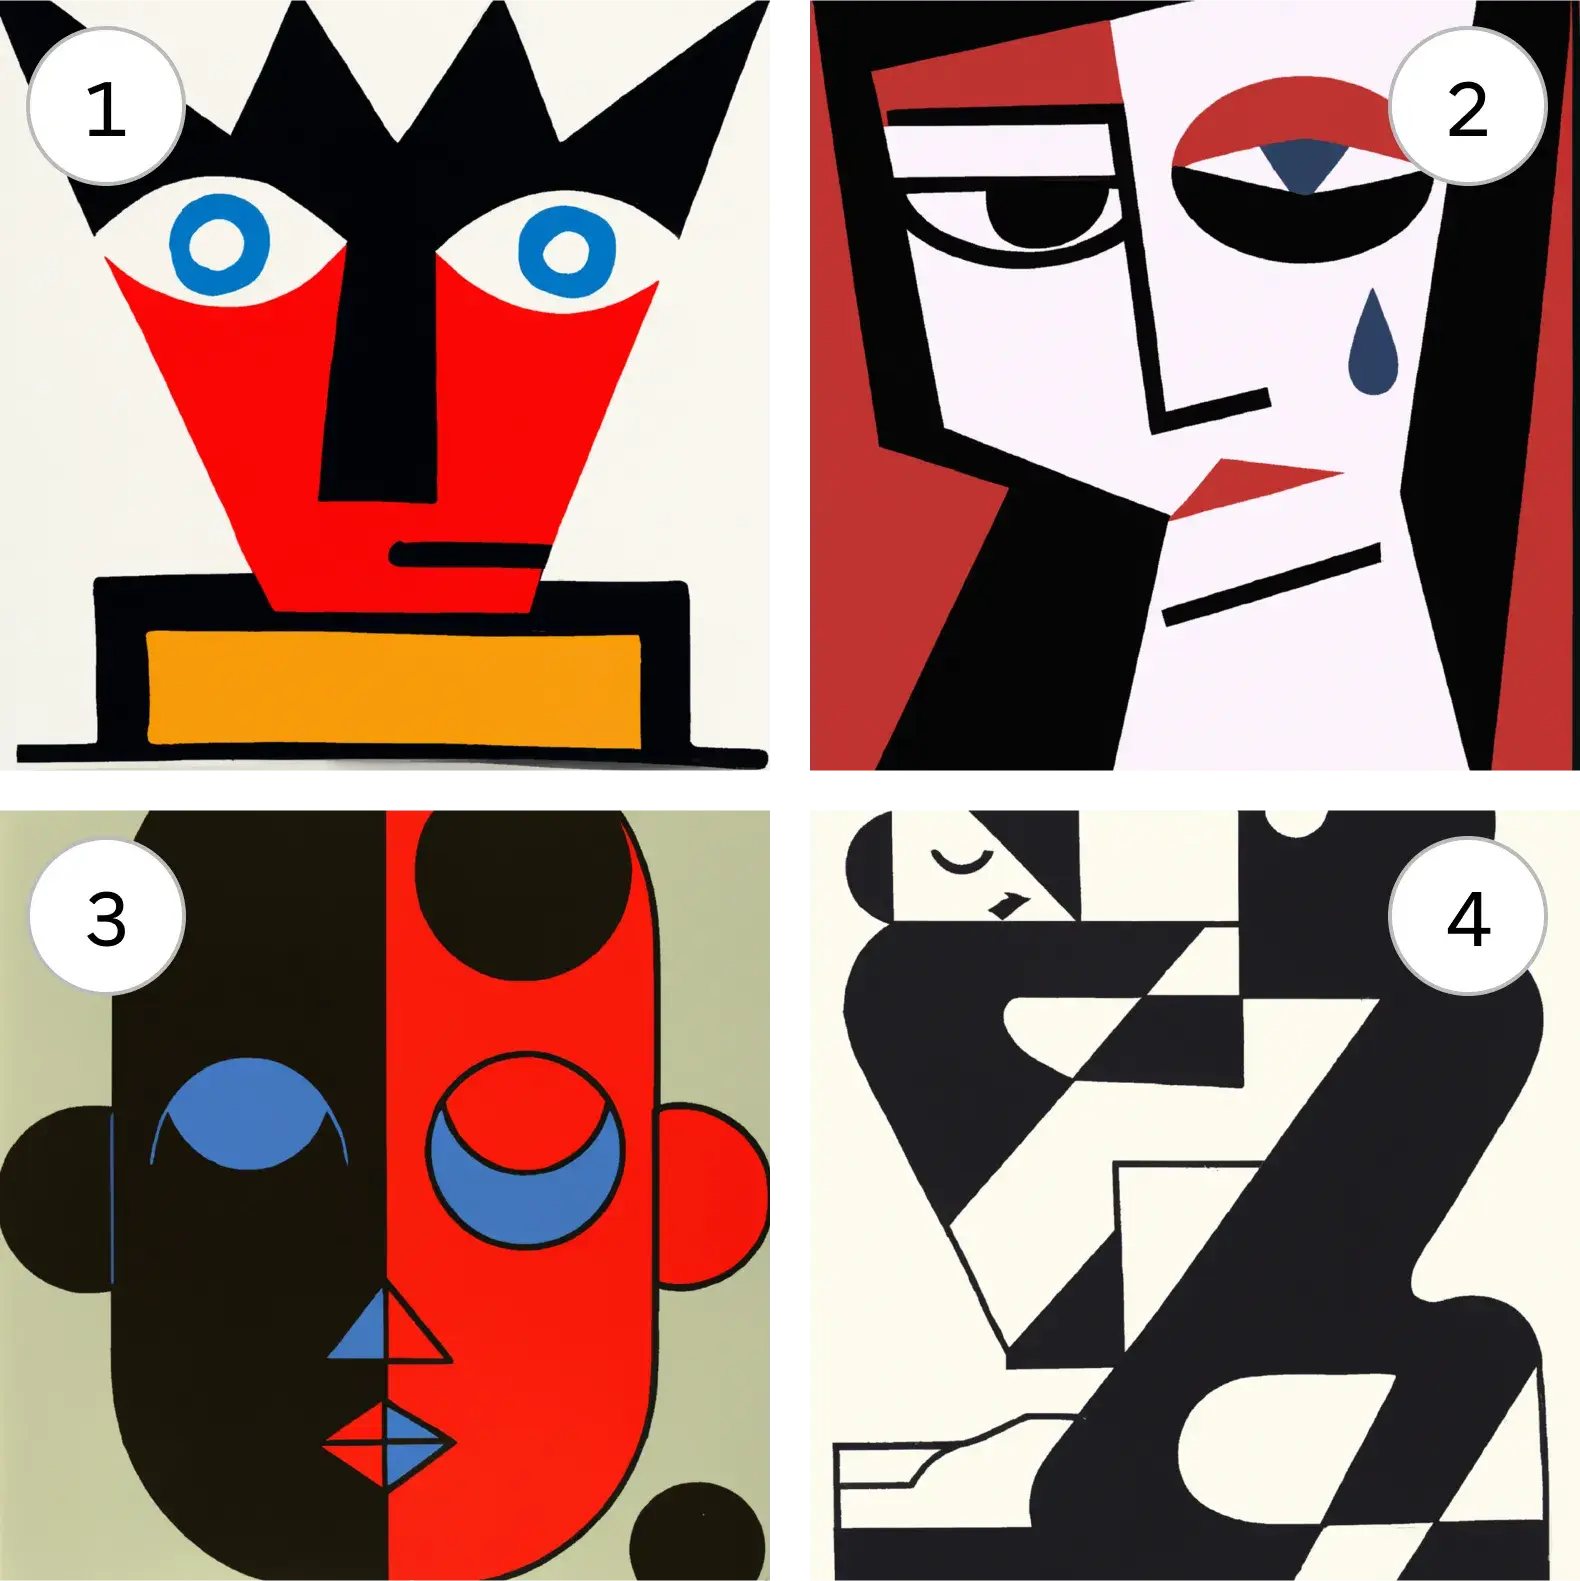 Four different images in the Bauhaus style, created by using slight variations on the same text prompt.